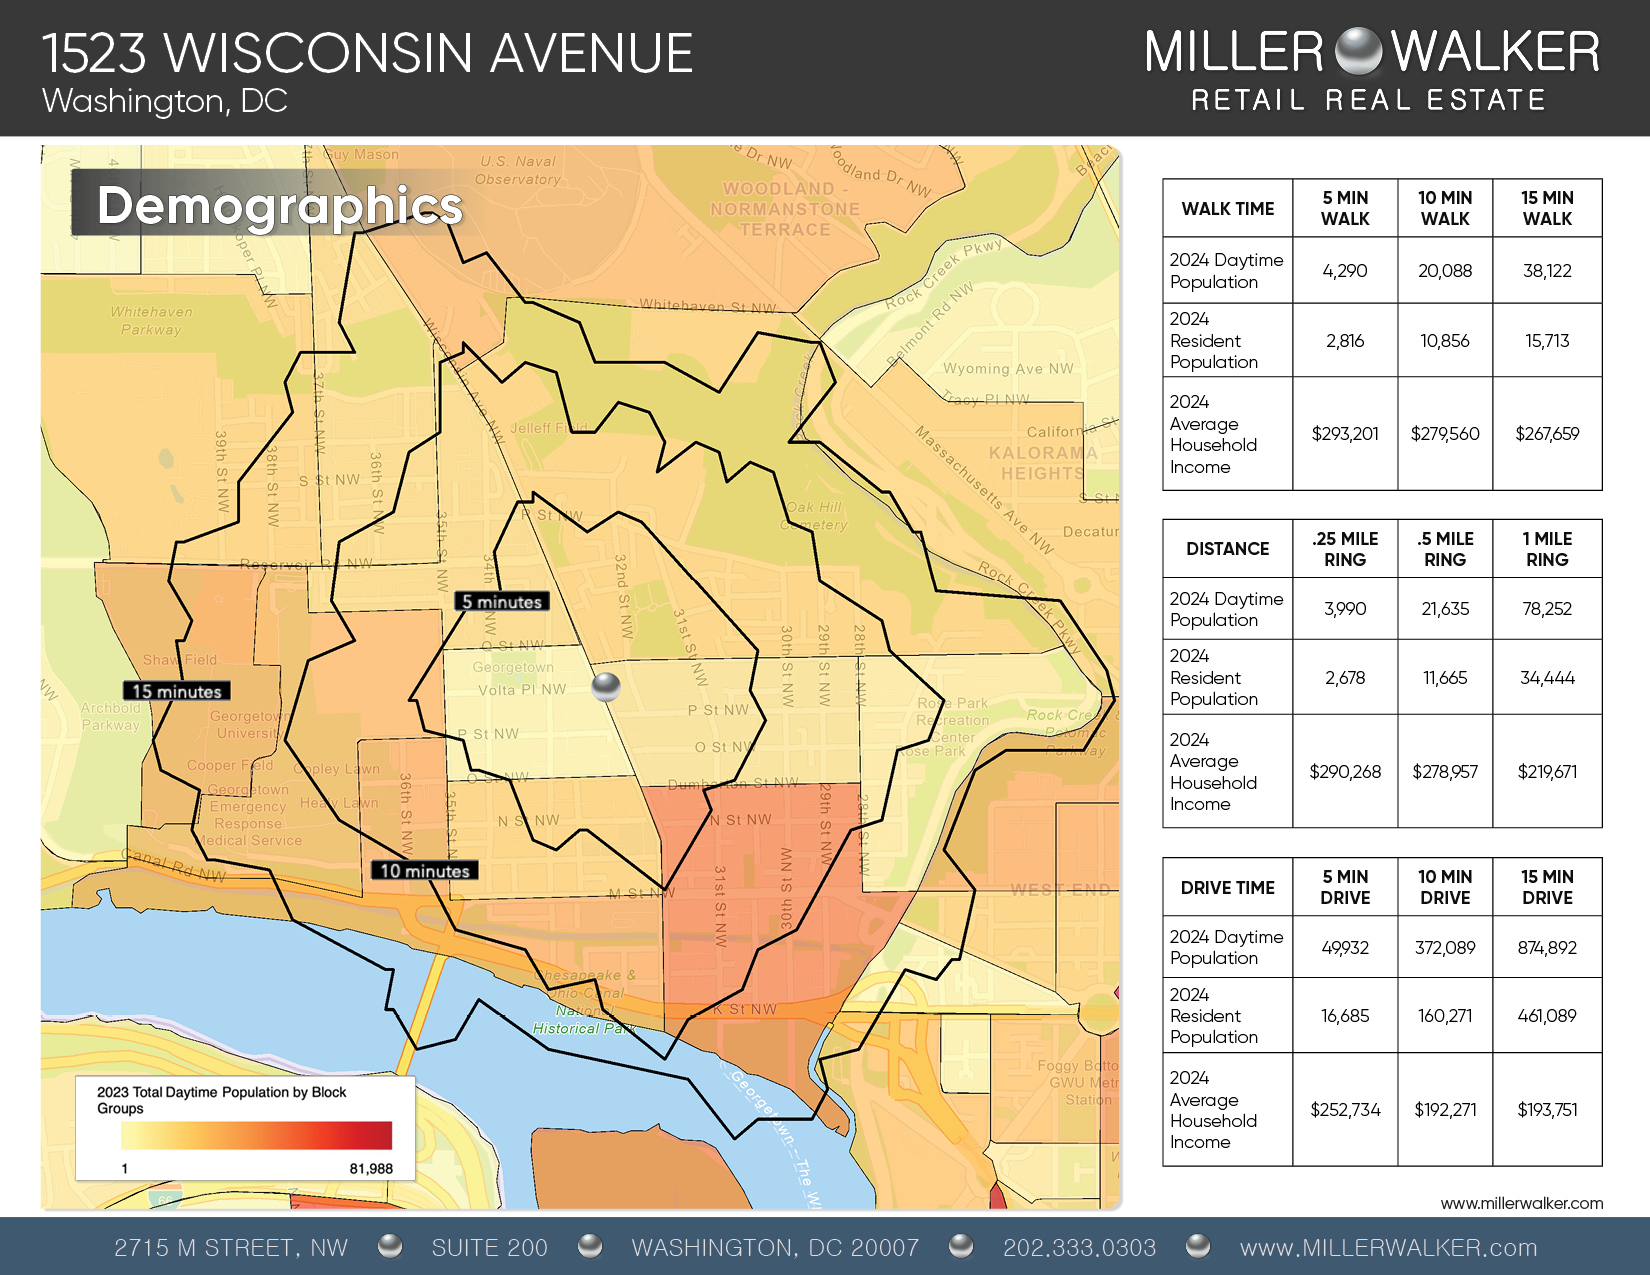 Demographics Chart and walk times: 1523 Wisconsin Ave NW, Georgetown, Washington DC